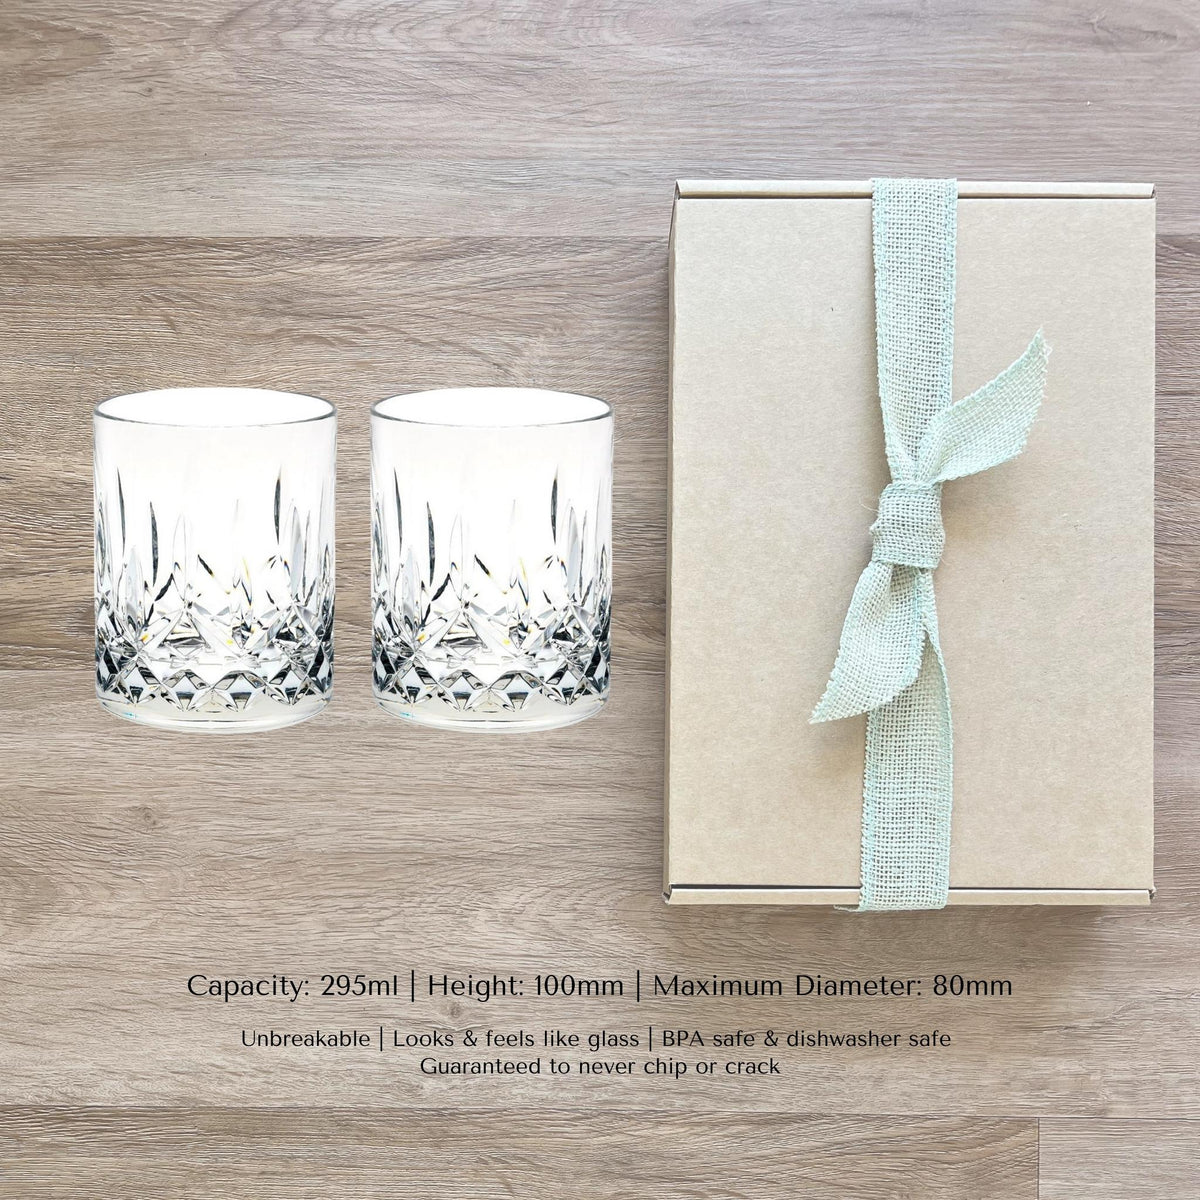 Sip back and chill-ax. Gift box with DStill diamond cut old fashion glasses.